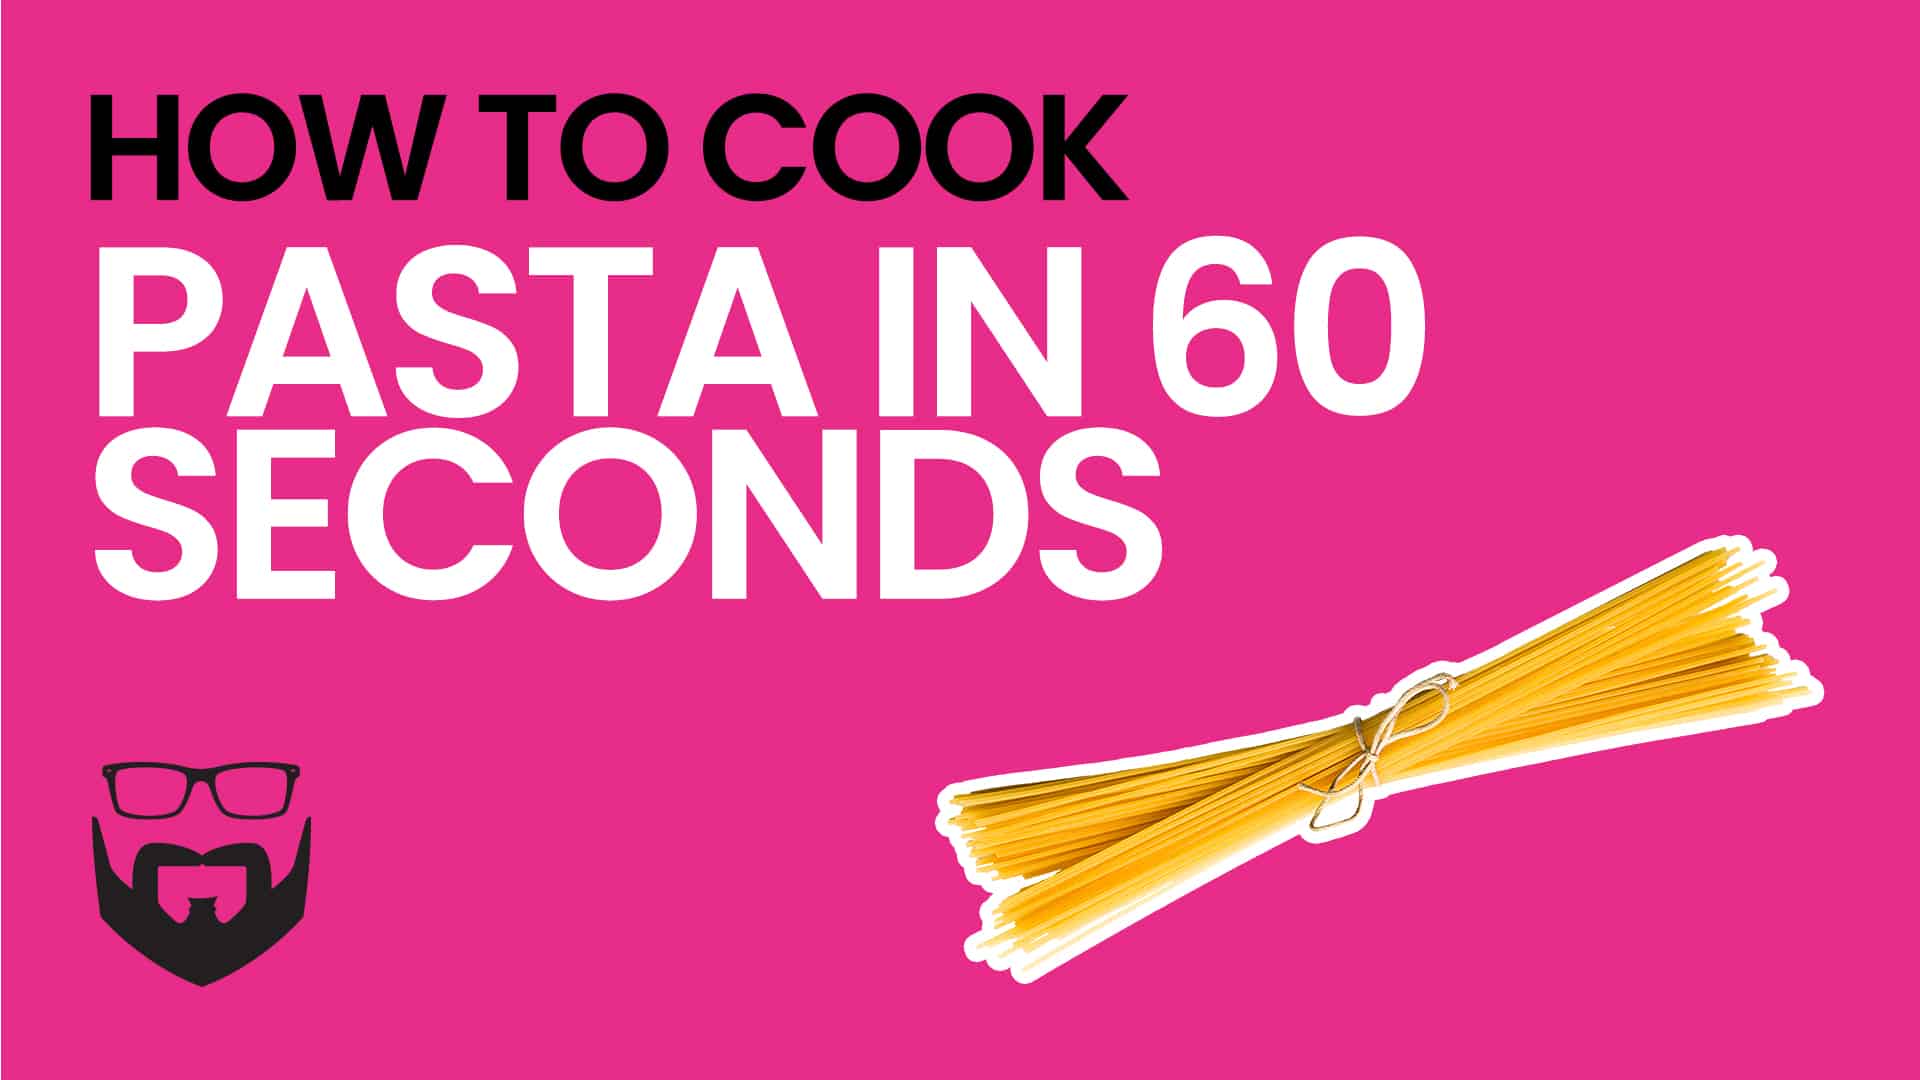 How to Cook Pasta in 60 Seconds Video - Pink